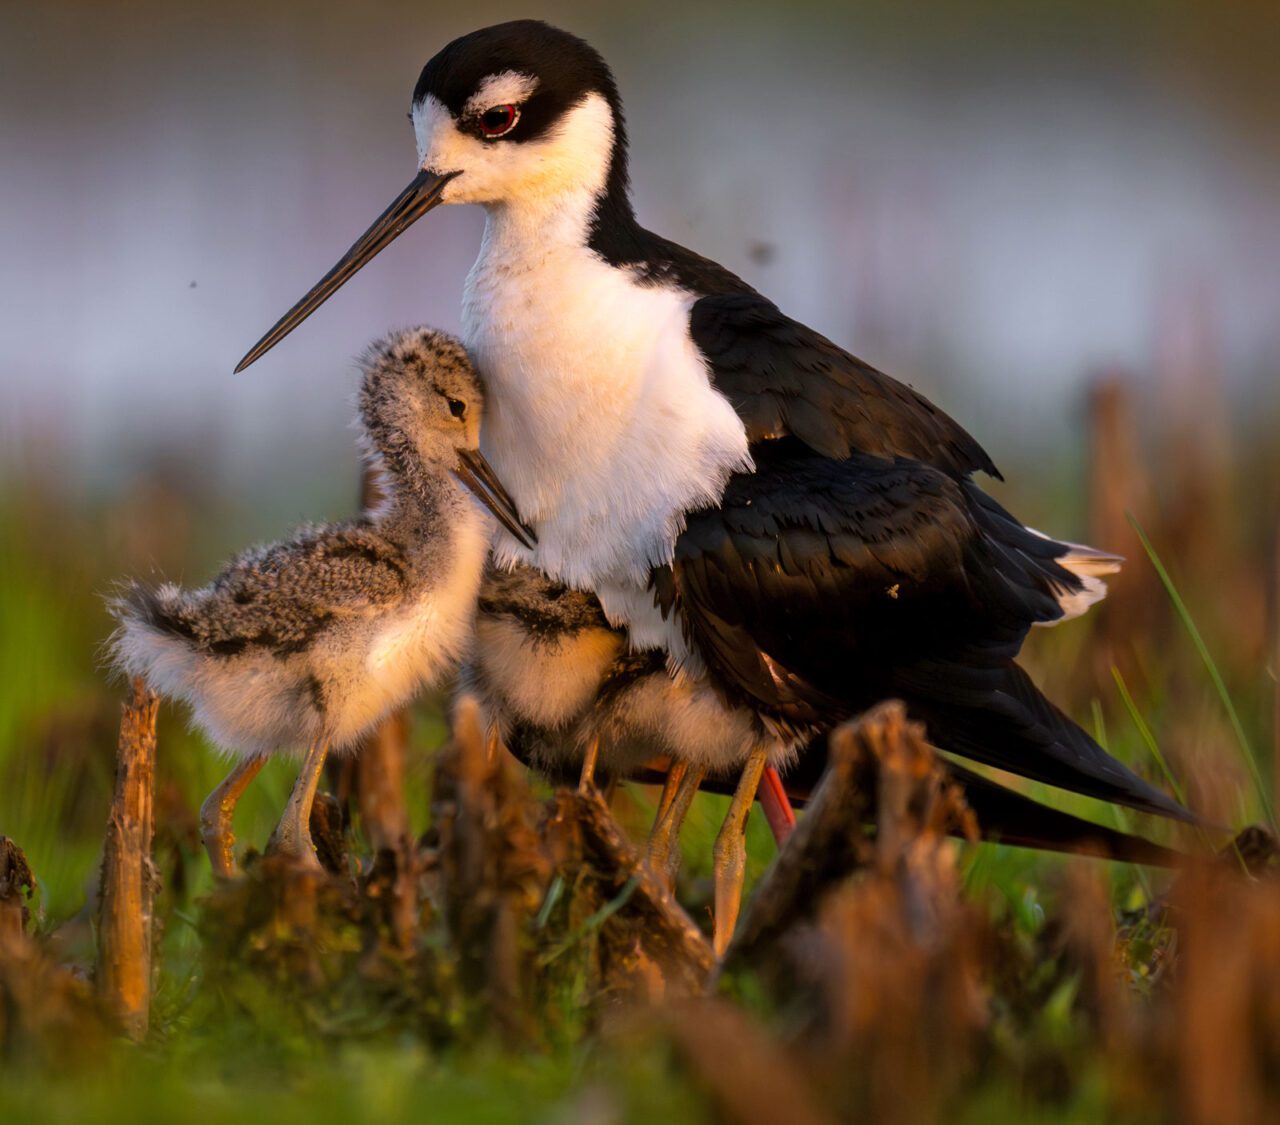 Black and white bird with a long bill stands over its brown and beige fluffy chicks.